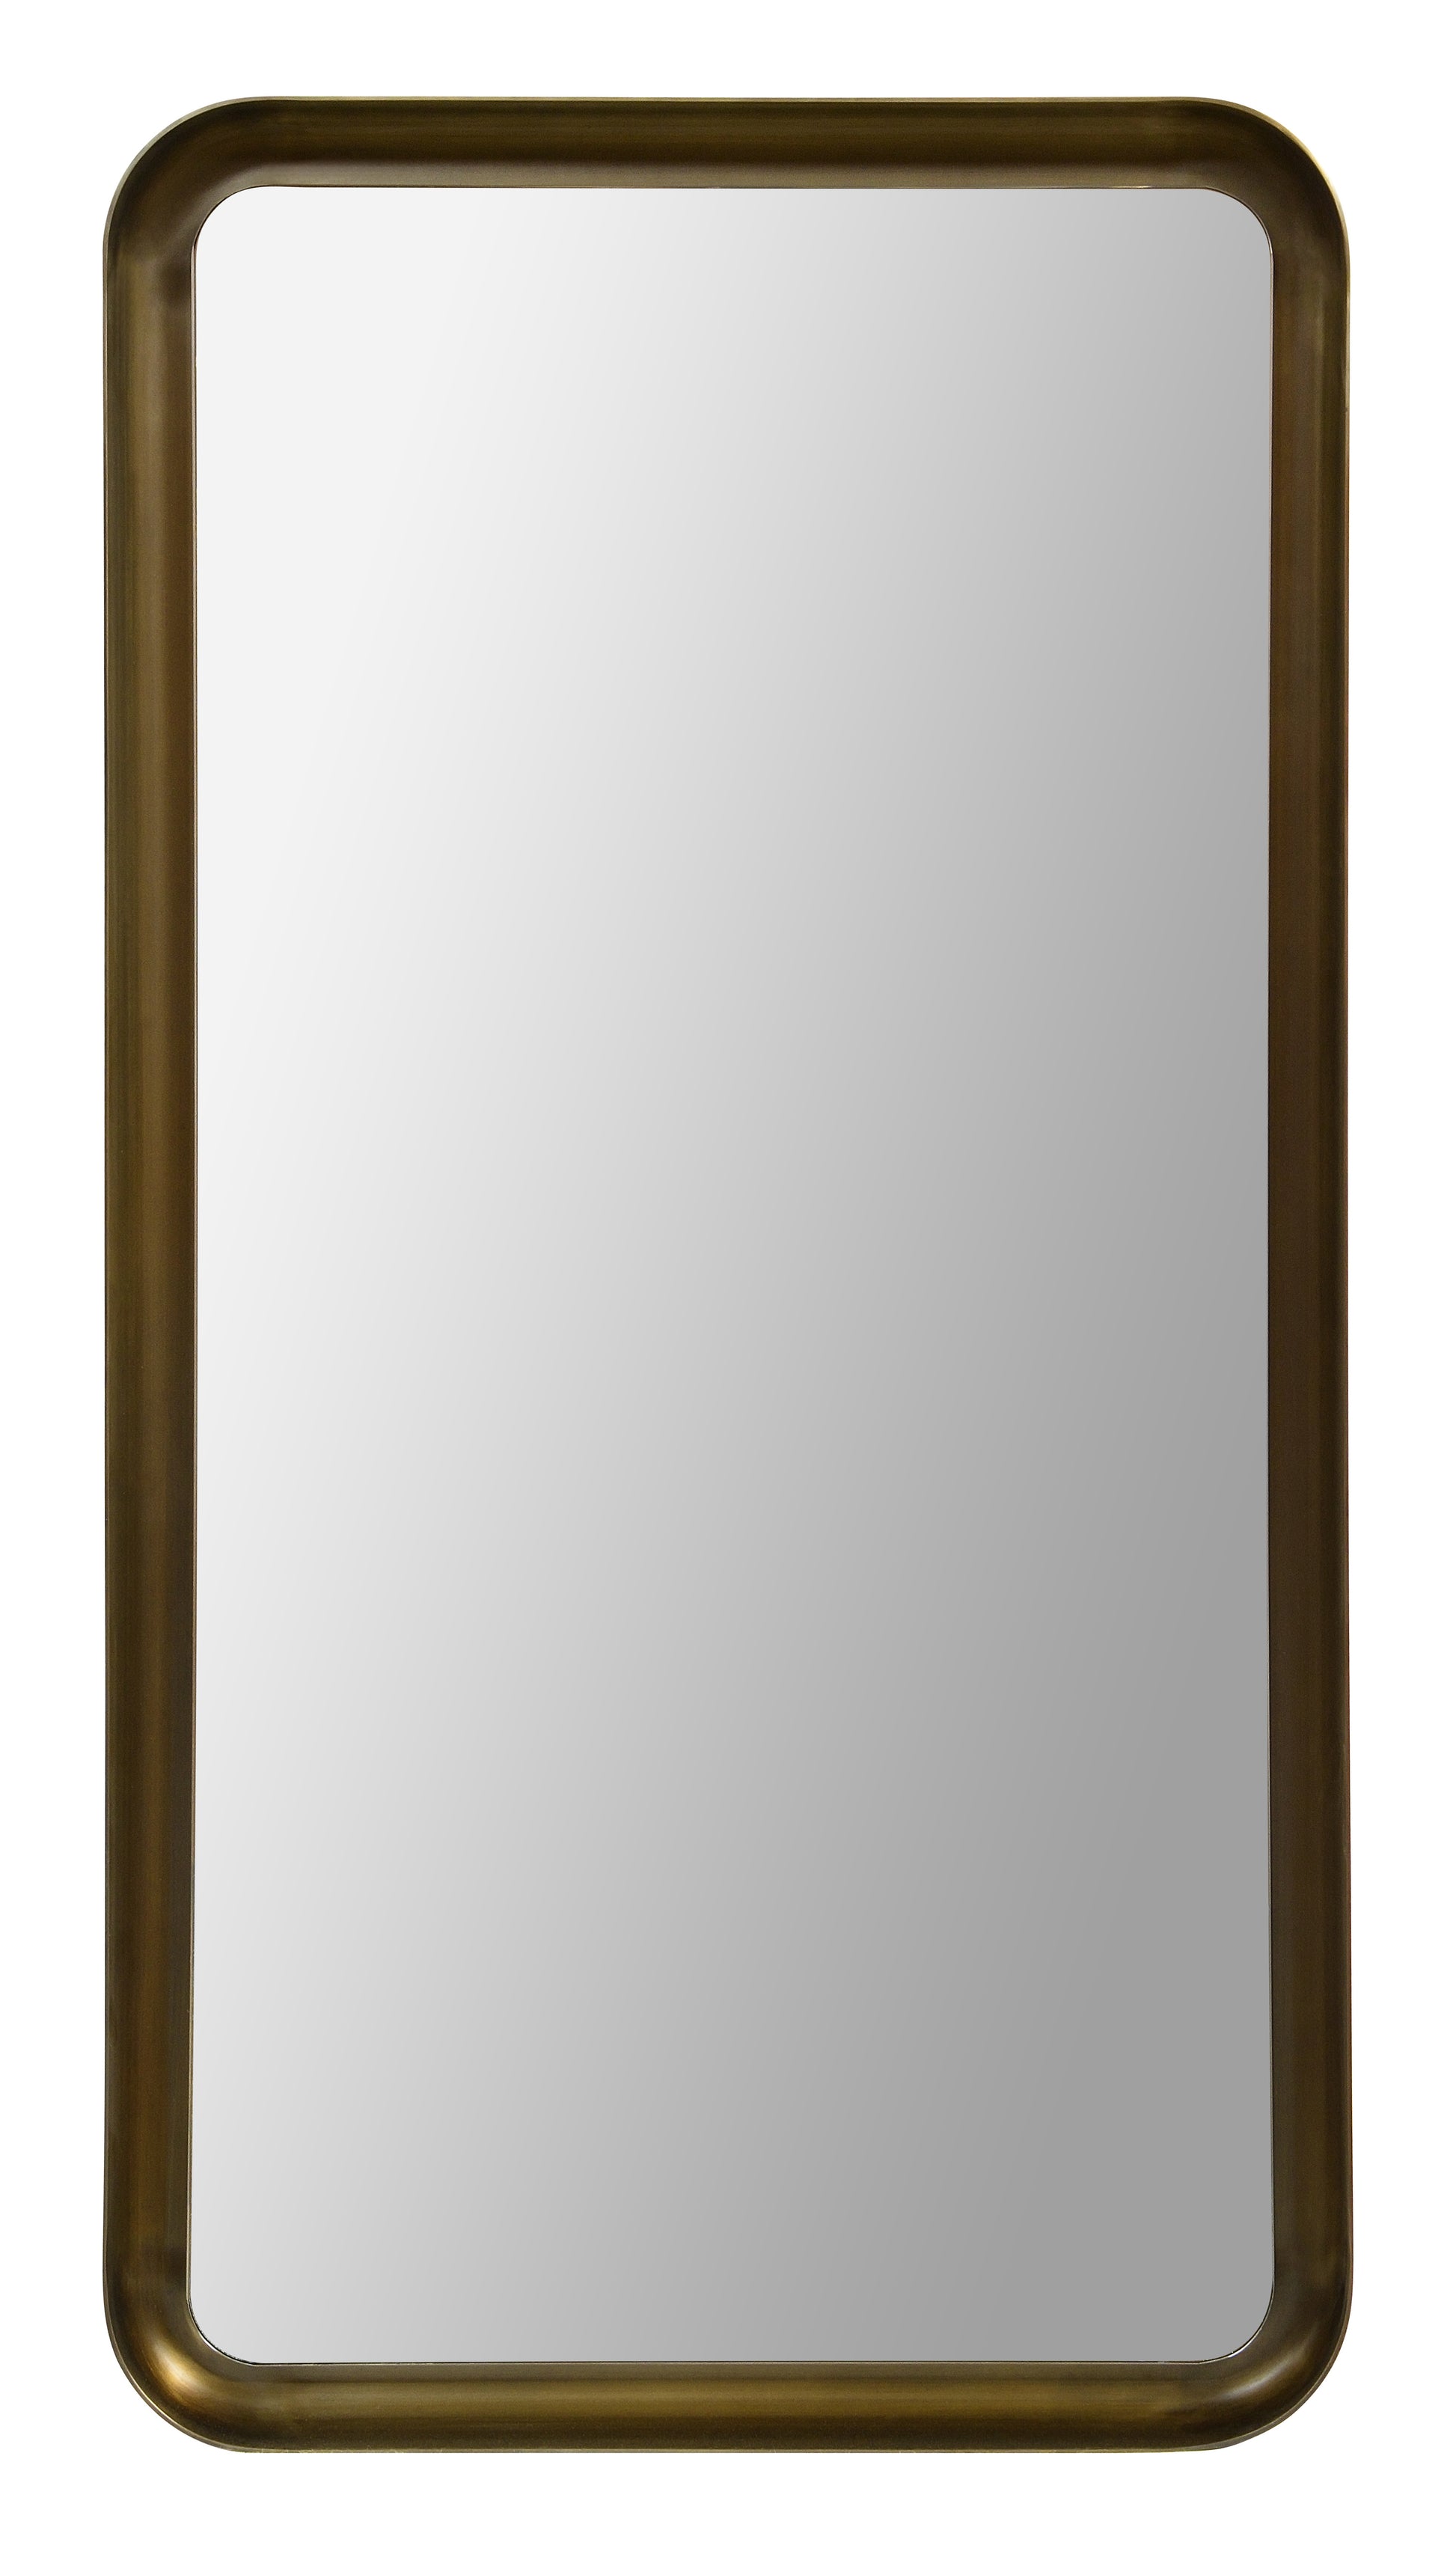 Mirror with rounded corners